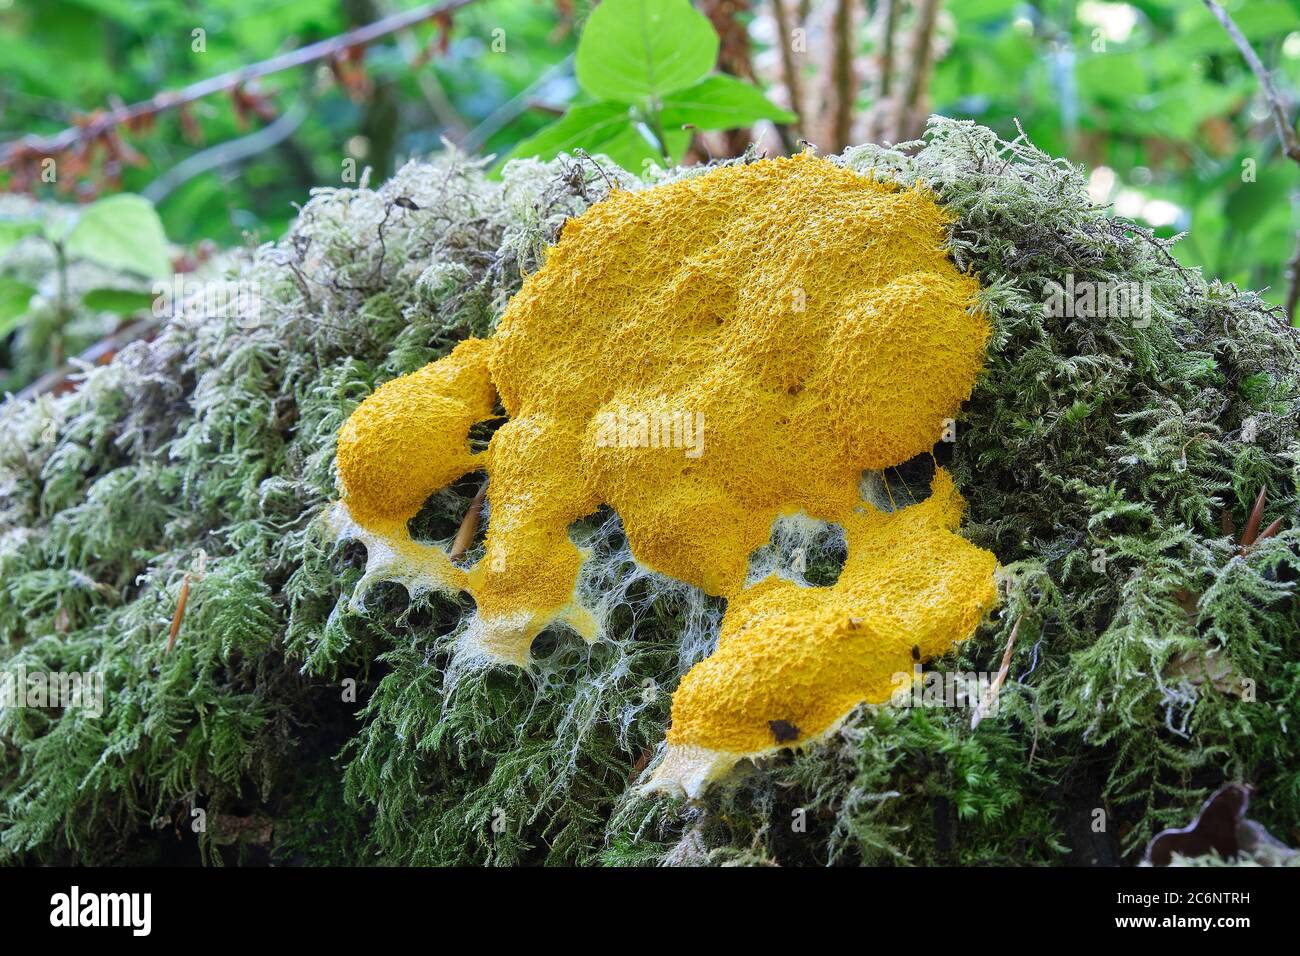 Fuligo septica Dogs Vomit slime mold growing on moss in woodland Stock Photo